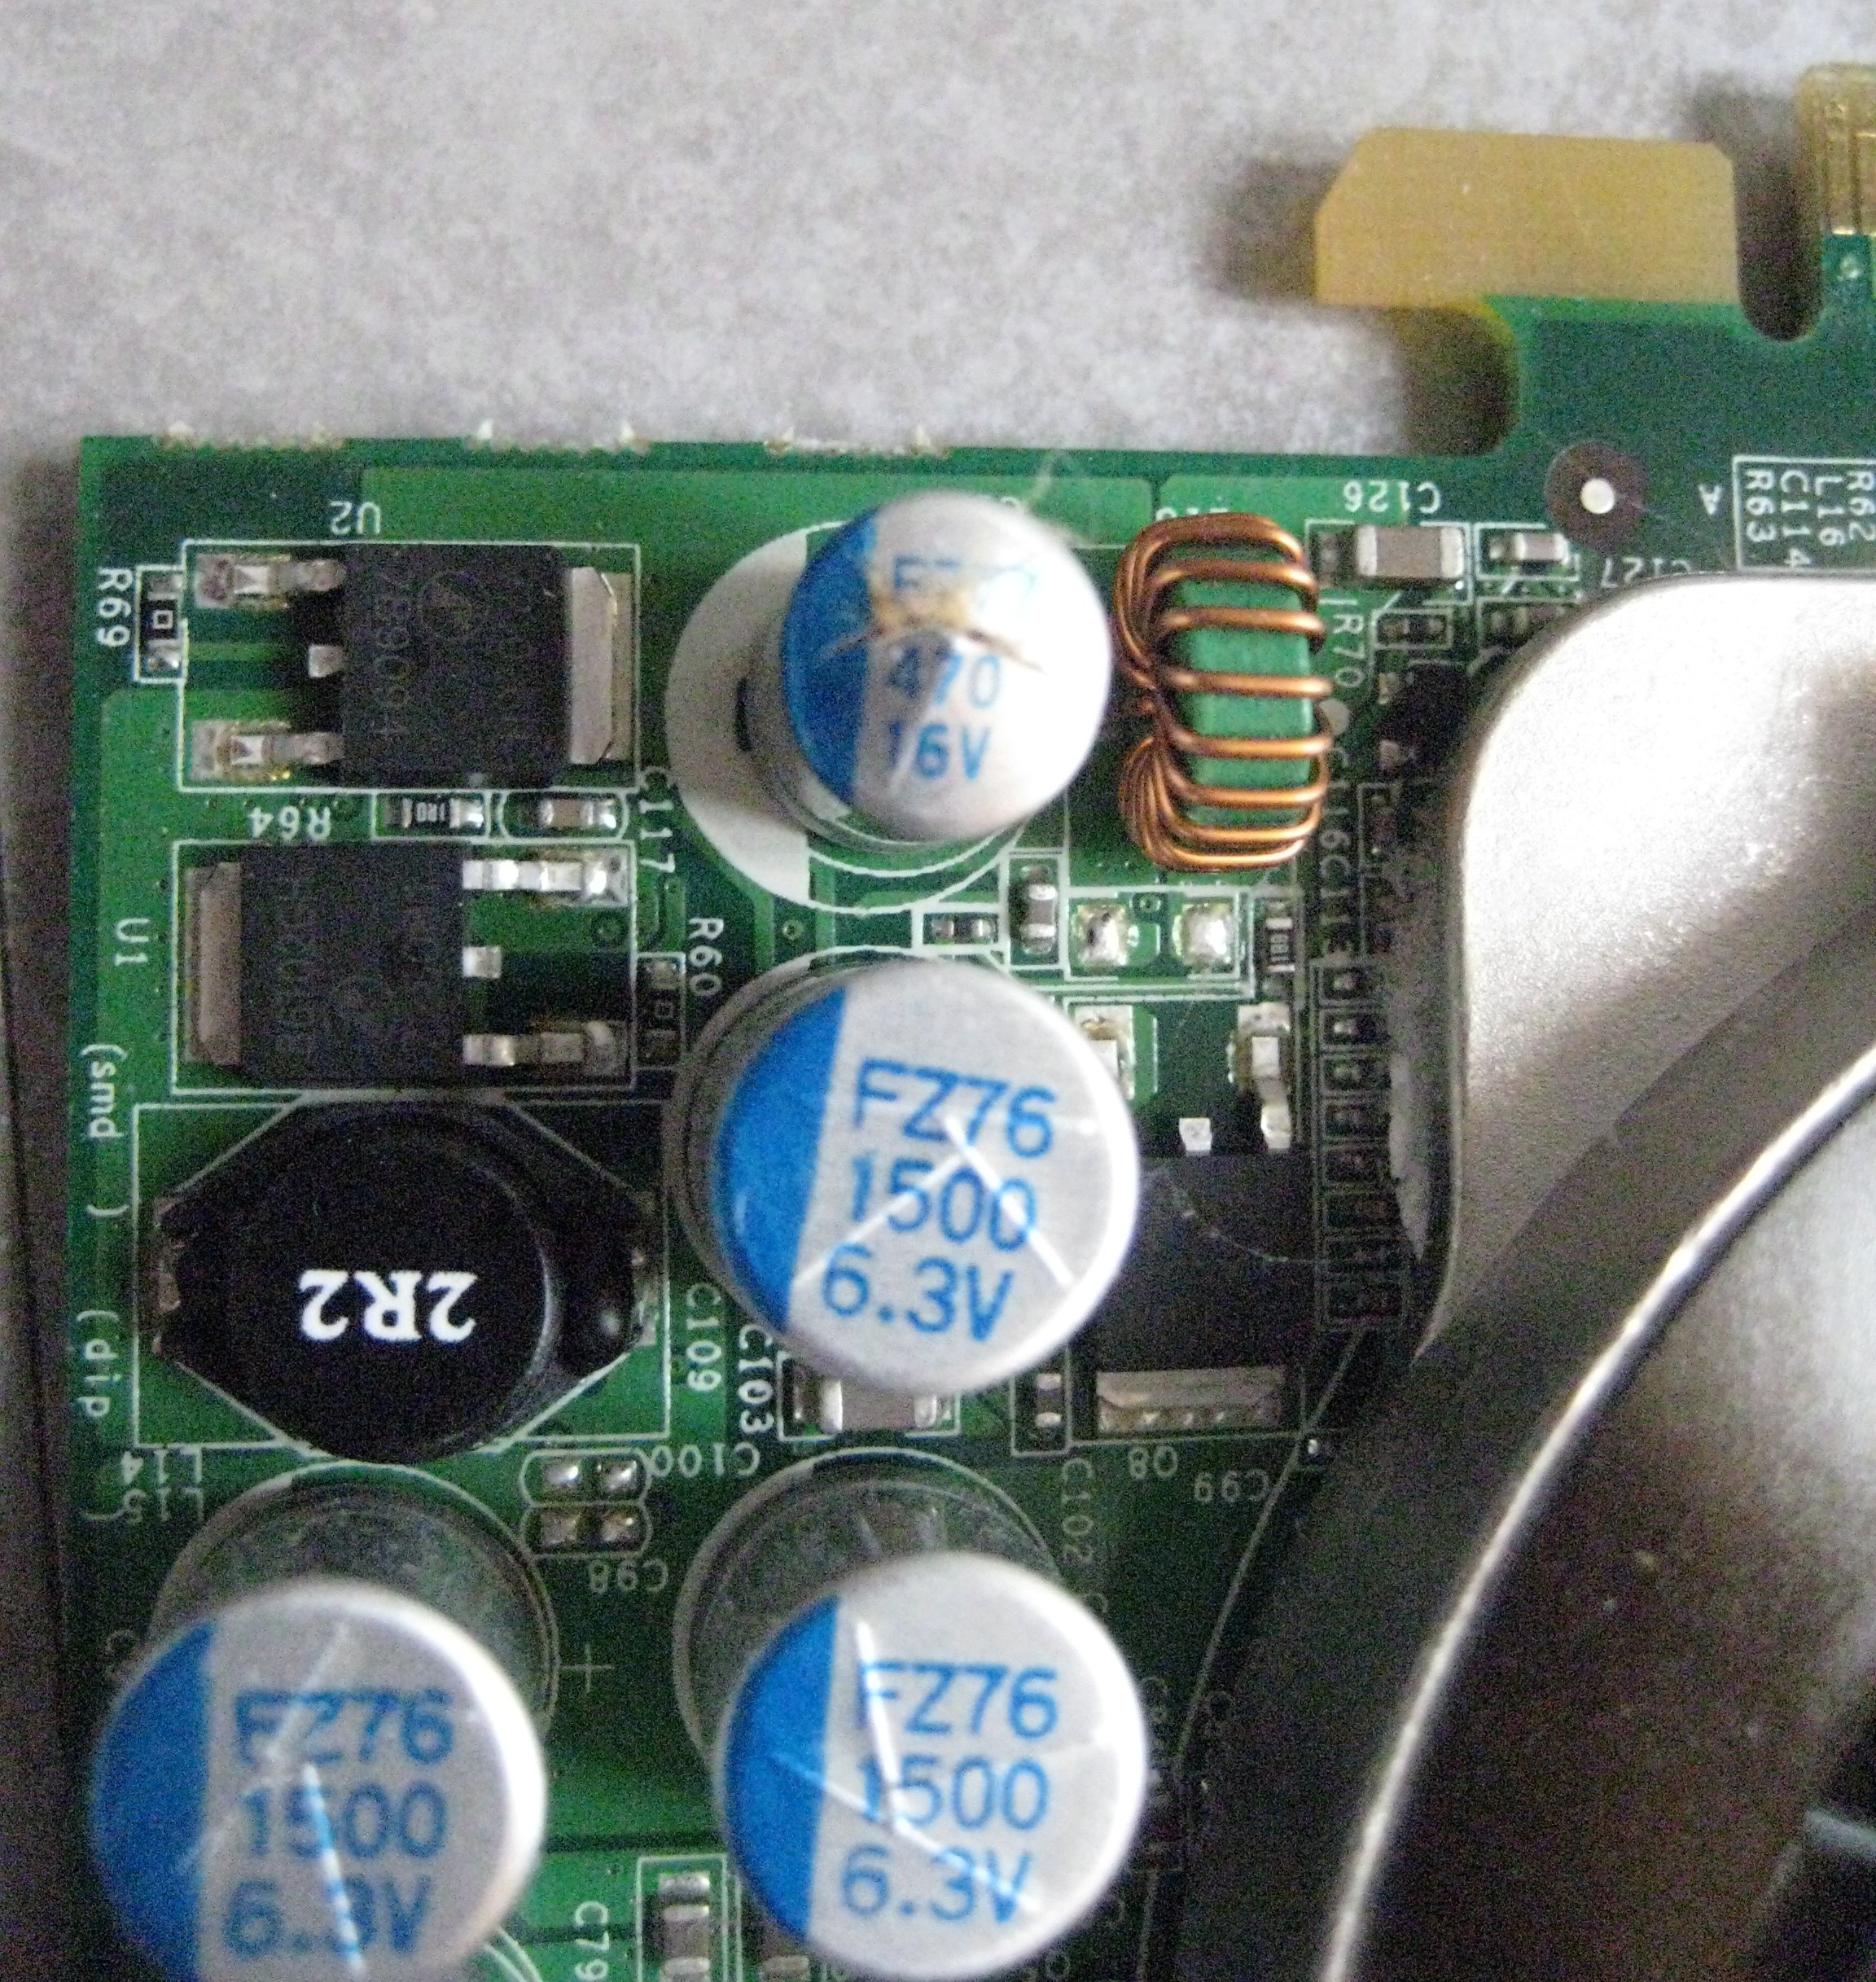 File:Blown capacitor on video card.jpg - Wikimedia Commons